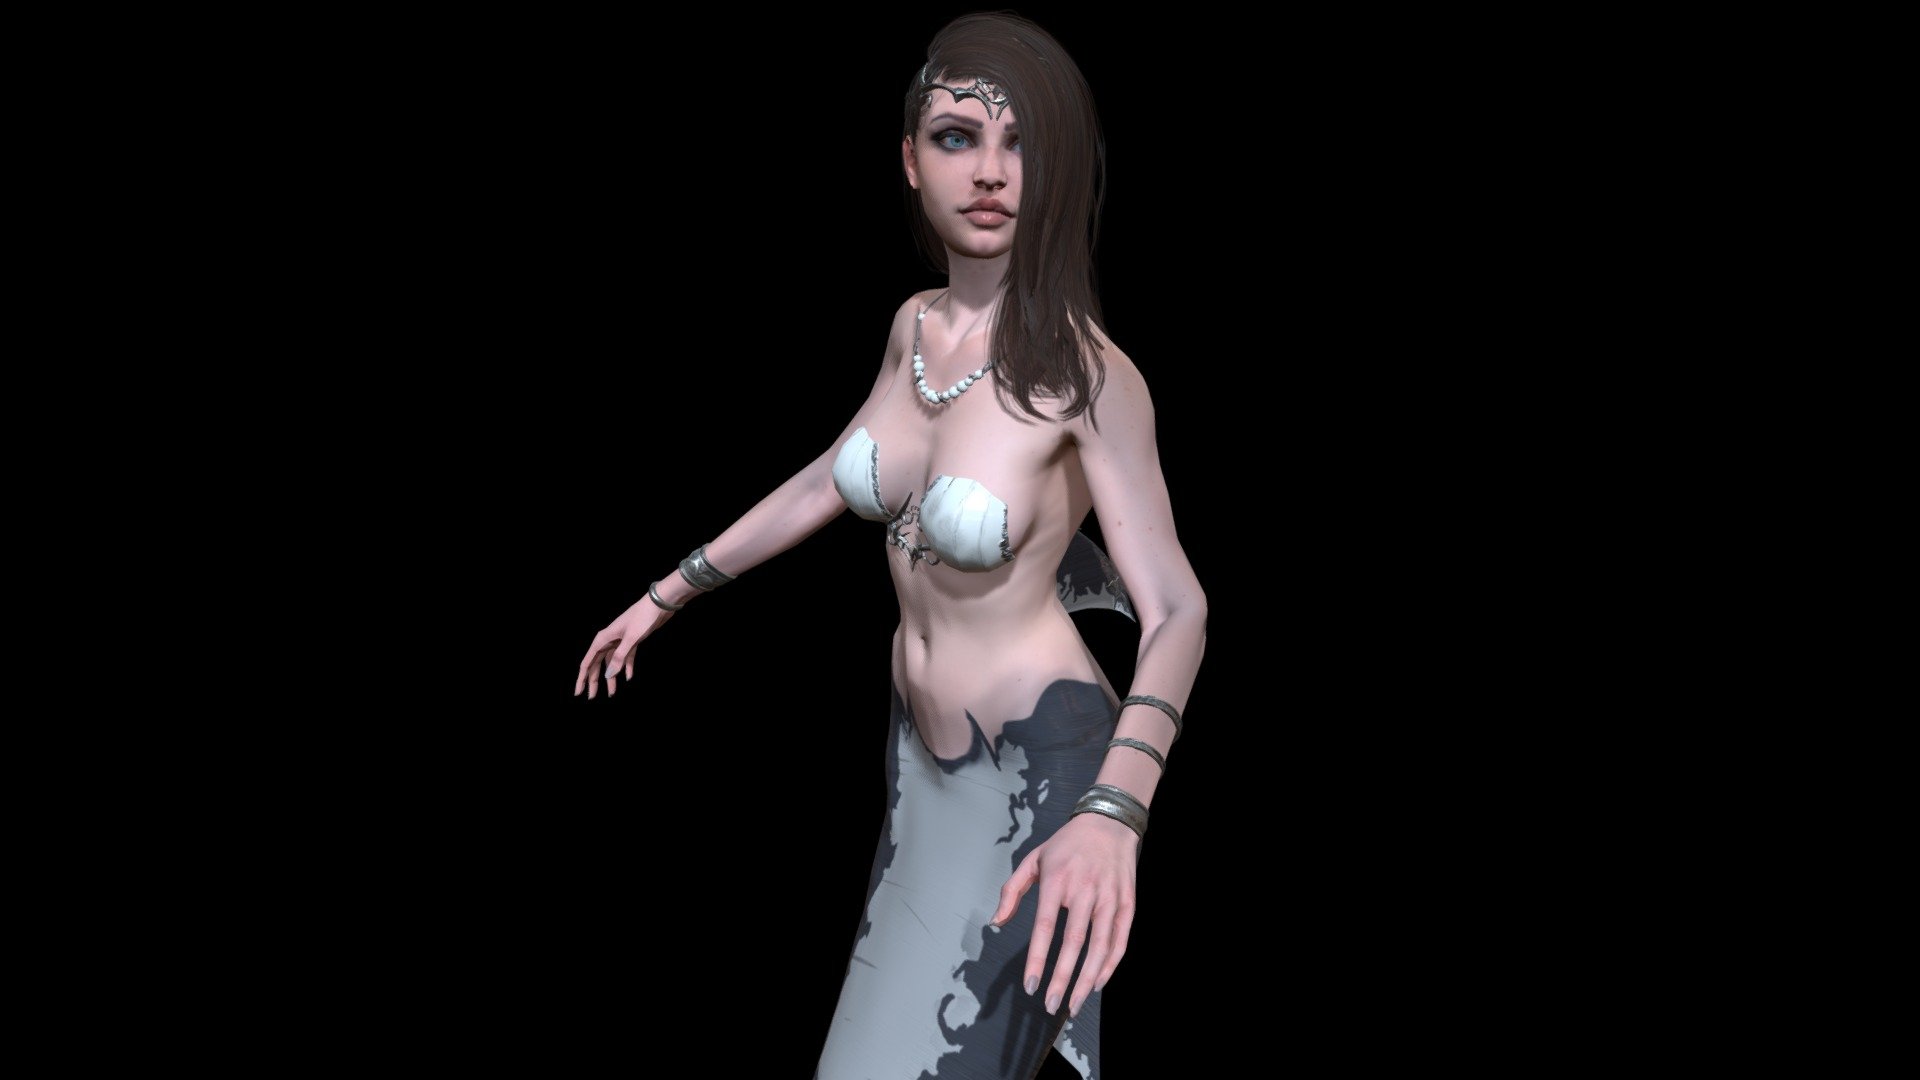 Low-poly model of the character Mermaid
Suitable for games of different genre: RPG, strategy, first-person shooter, etc.
In the archive, the basic mesh (fbx and maya)

Textures pack map 4096x4096 and 2048 support 512
four skins 

In the model it is desirable to use a shader with a two-sided display of polygons.

The model contains 34 animations
atack (x5)
swiming (x6)
Straif LR (x2)
idle (x4)
death (x4)
gethit(x5)
spellcast(x2)
other actions (x6)

faces 21945
verts 29156
tris 42910

Support me on patreon, and get access to unique content and other cool events patreon.com/dremorn

And also subscribe to my insta, there are a lot of pictures and other cool things 
instagram.com/andrey.panchenko/ - MermaidGameReady - 3D model by dremorn 3d model